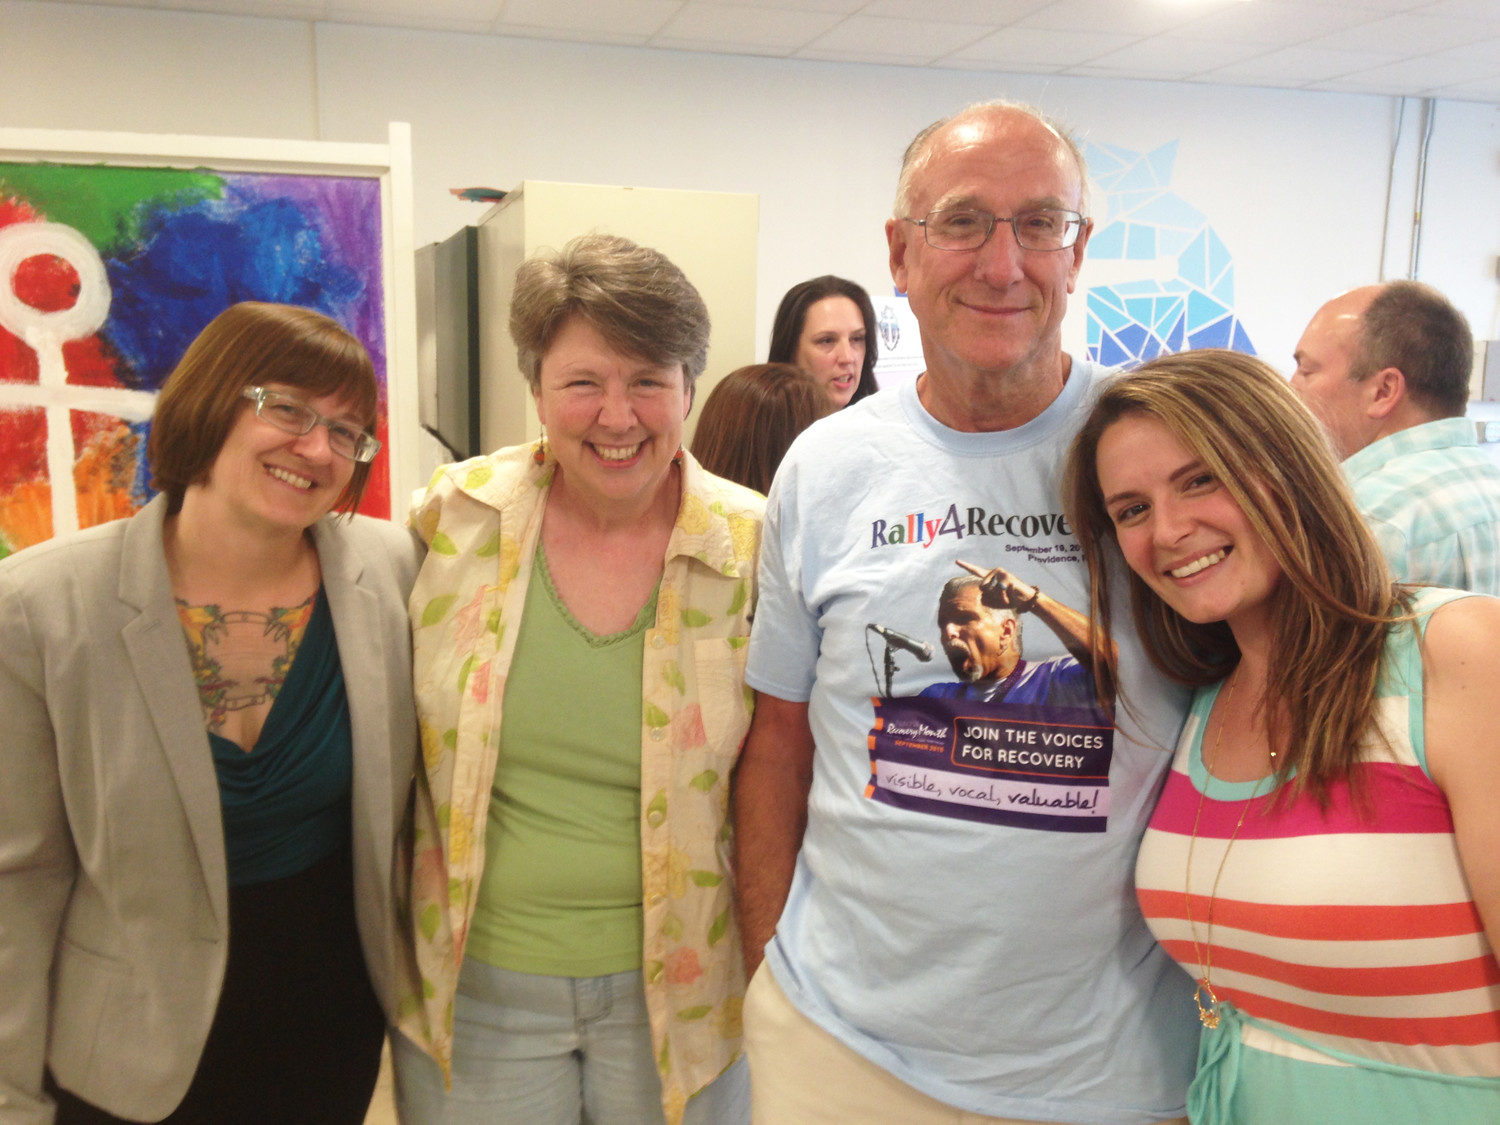 The extended family of RICARES at the opening of the Jim Gillen Teen Center: From left, Monica Smith, Michelle McKenzie, Ian Knowles and Abby Stenberg.